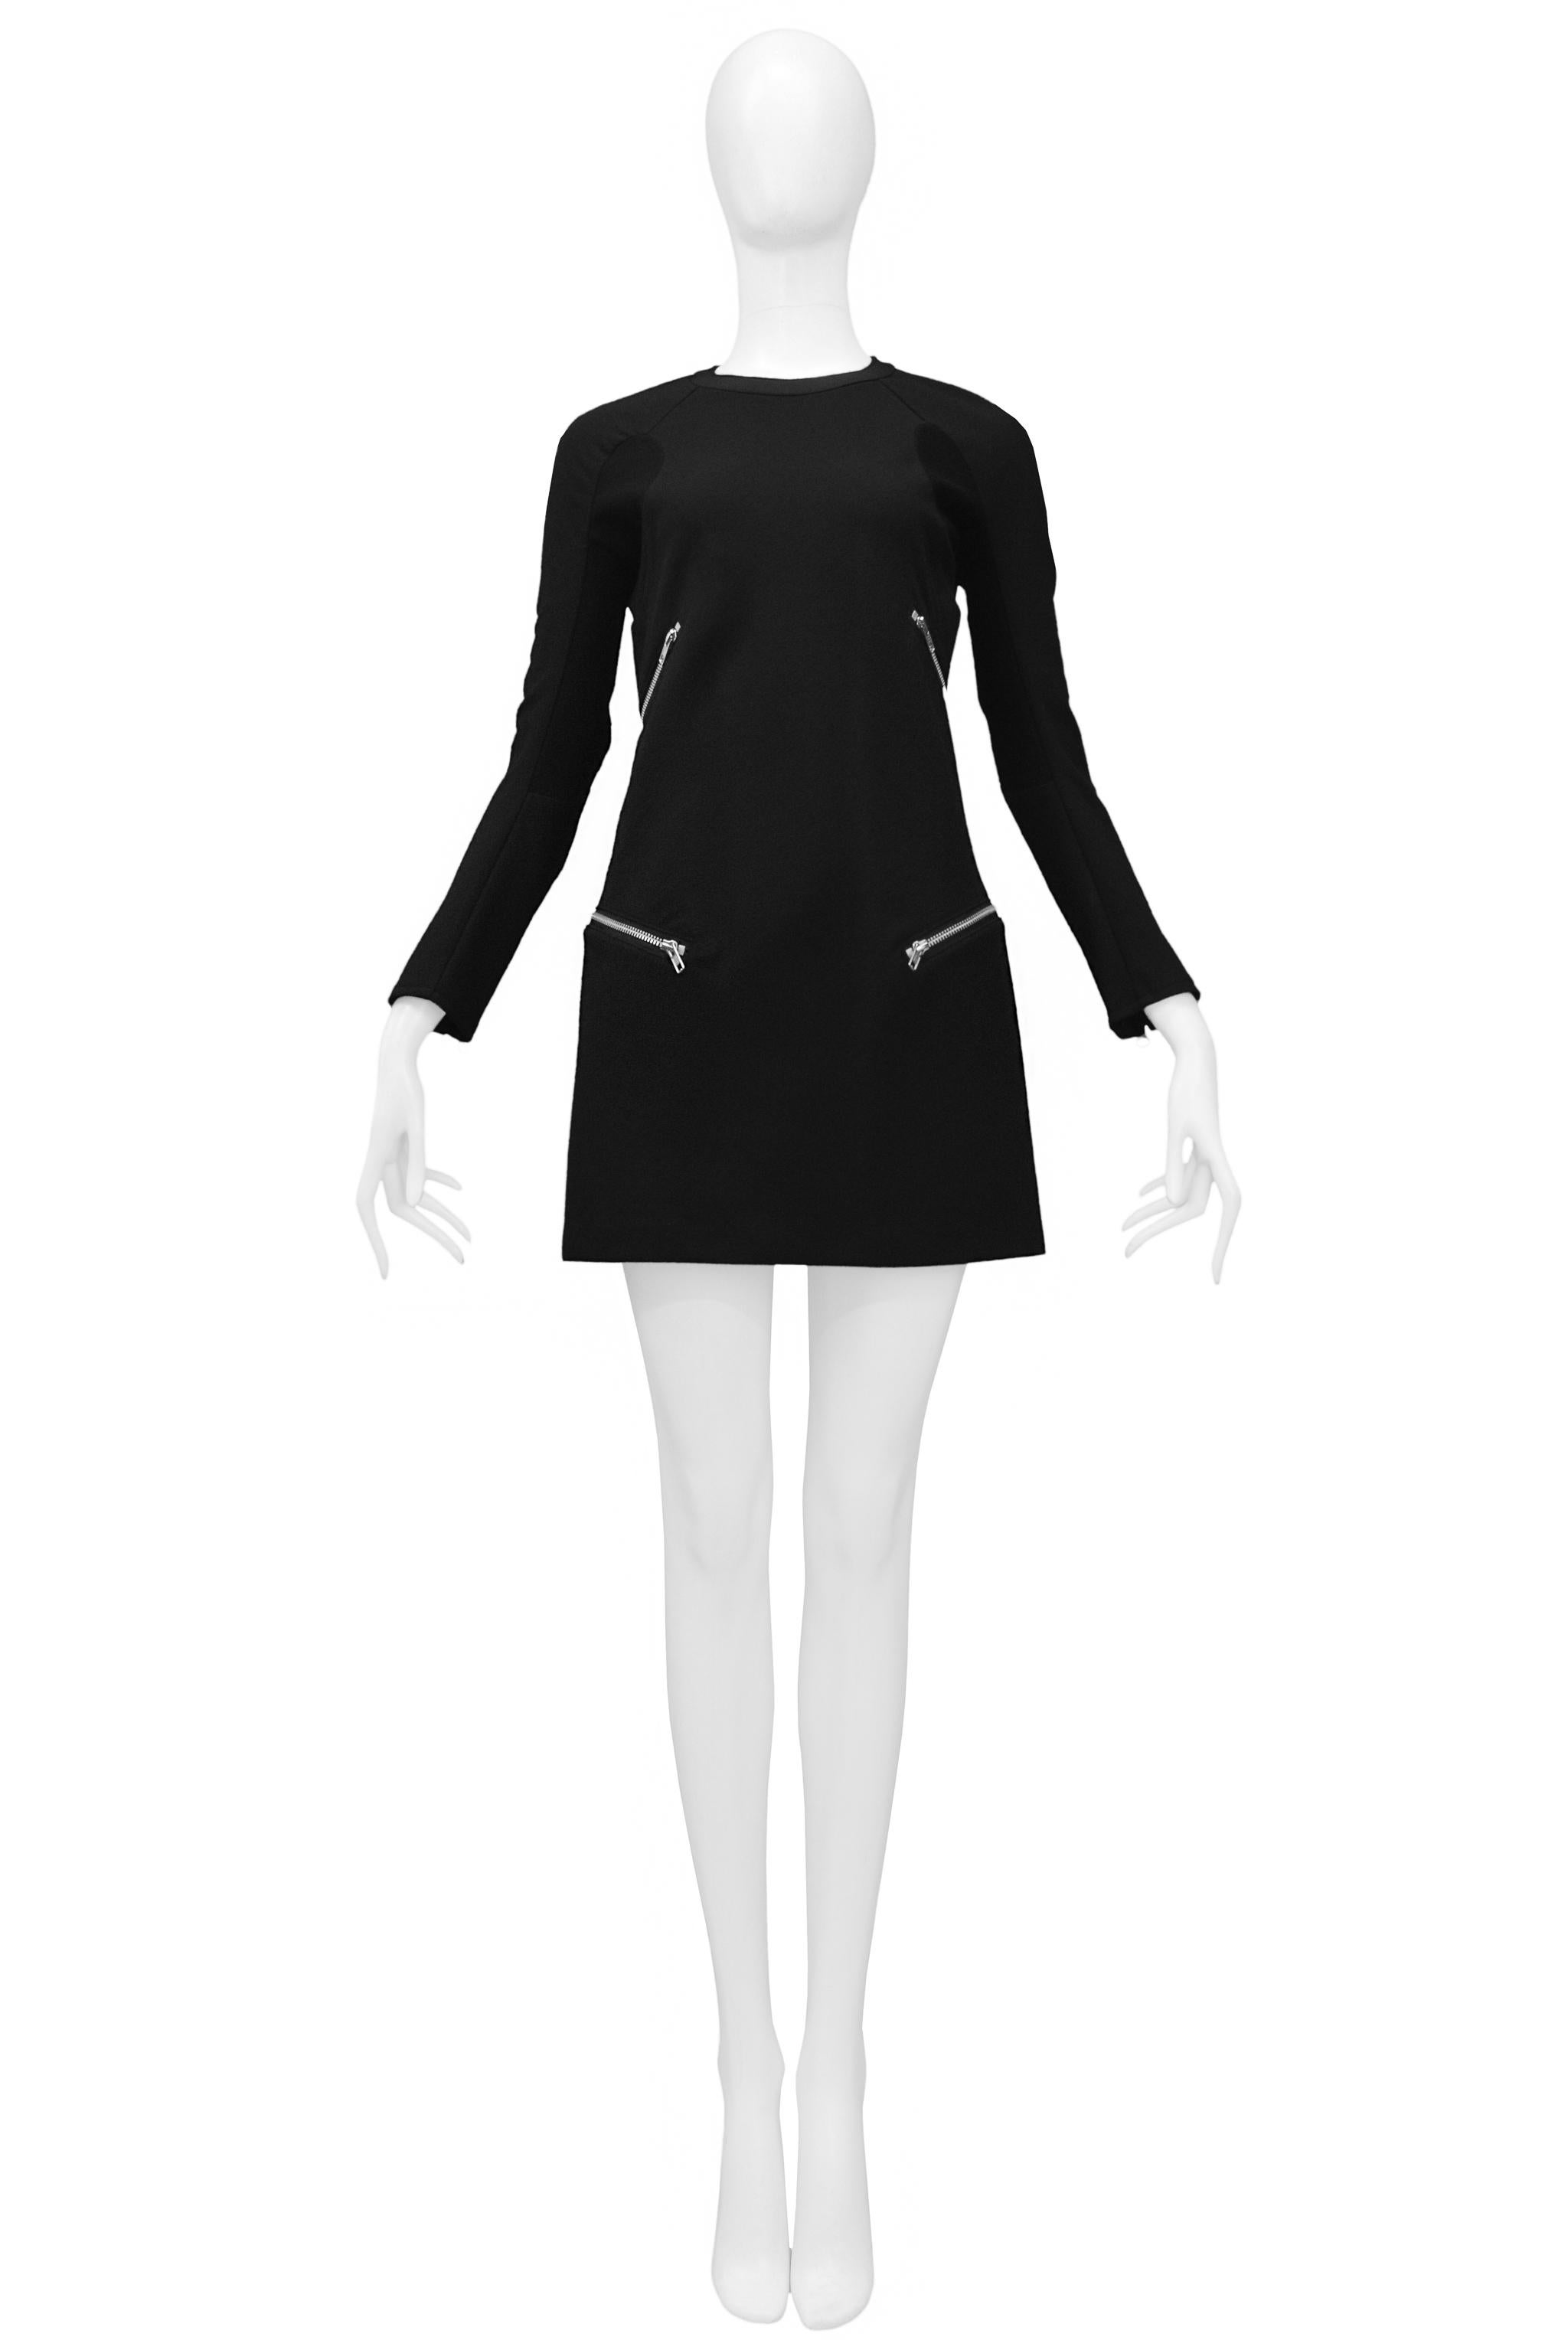 Resurrection Vintage is excited to offer a vintage Junya Watanabe black wool long sleeve dress featuring exposed zippers on the front sides and sleeves.

Junya Watanabe
Size: XS
Wool and Polyester Knit
2013 Collection
Excellent Vintage